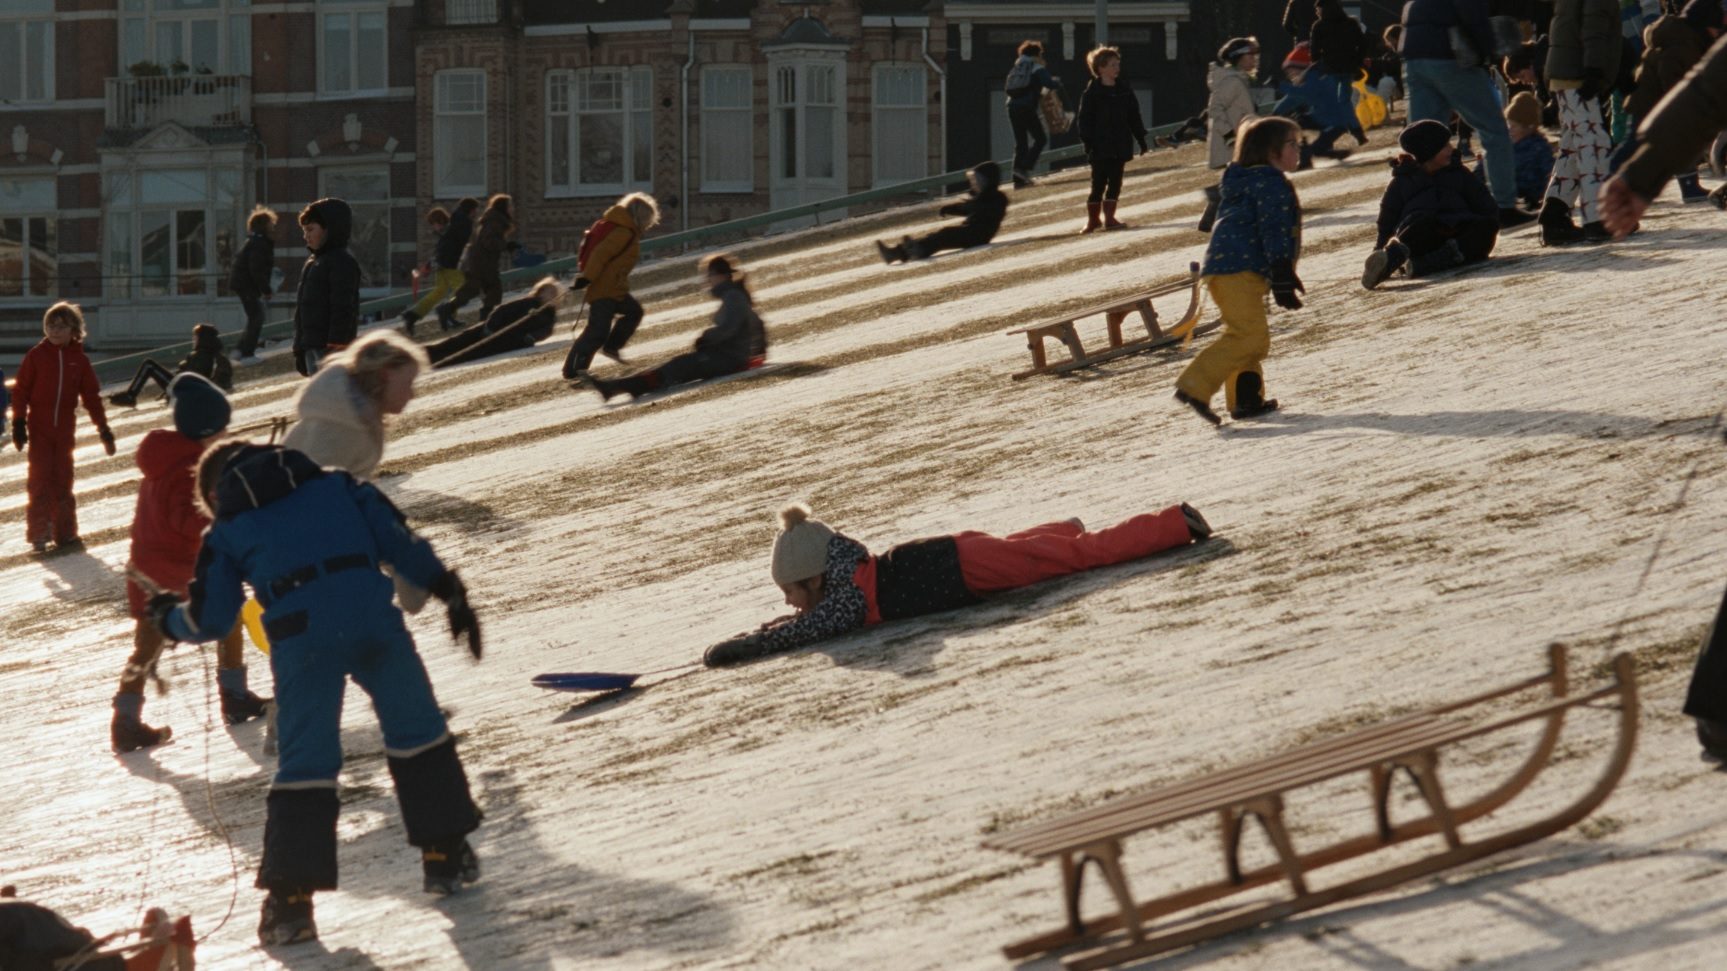 A scene from Steve McQueen’s Occupied City featuring carefree children sledging in Amsterdam, in stark contrast to the events that occurred in the city during the second world war. Photo: Family Affair Films & Lammas Park